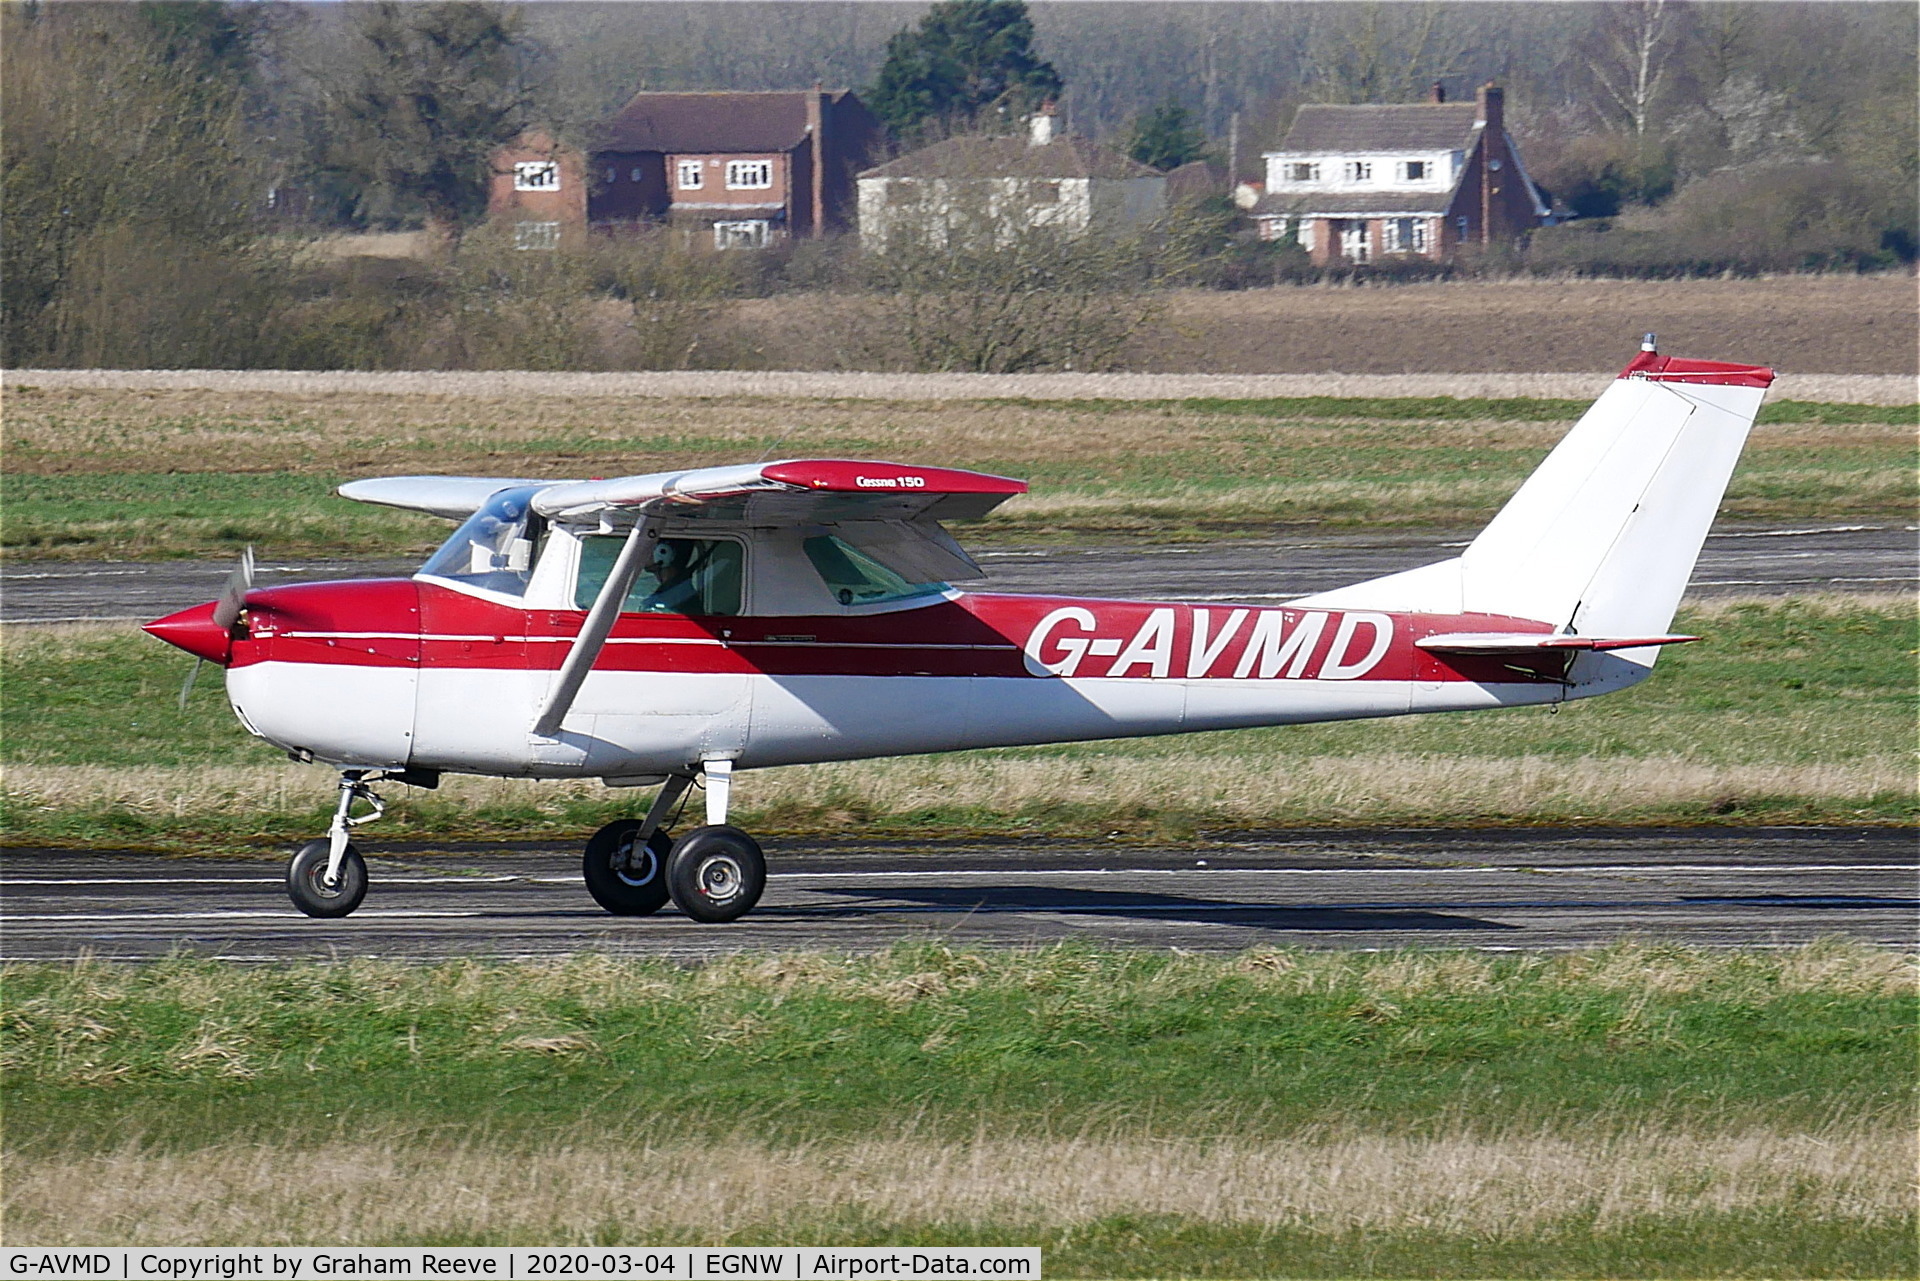 G-AVMD, 1966 Cessna 150G C/N 150-65504, Just landed at Wickenby.